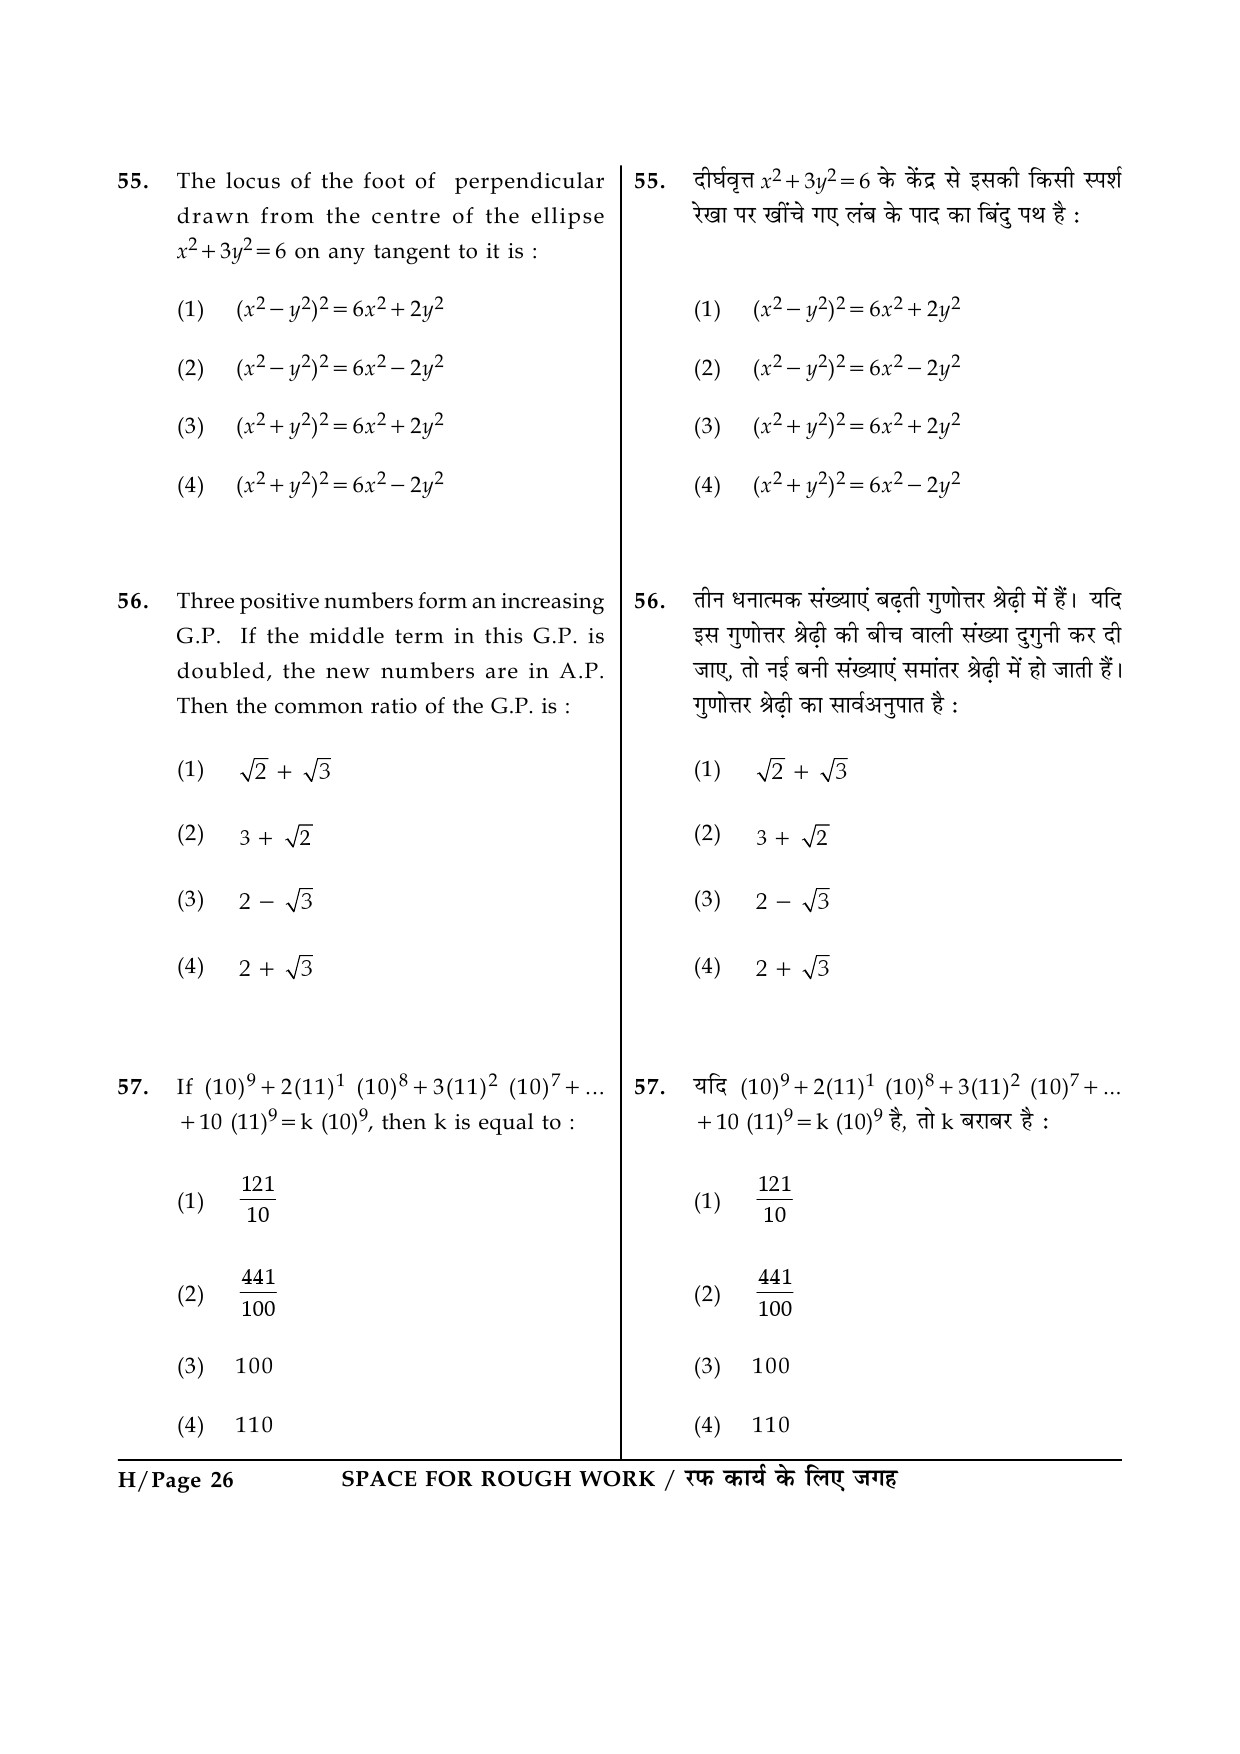 JEE Main Exam Question Paper 2014 Booklet H 26